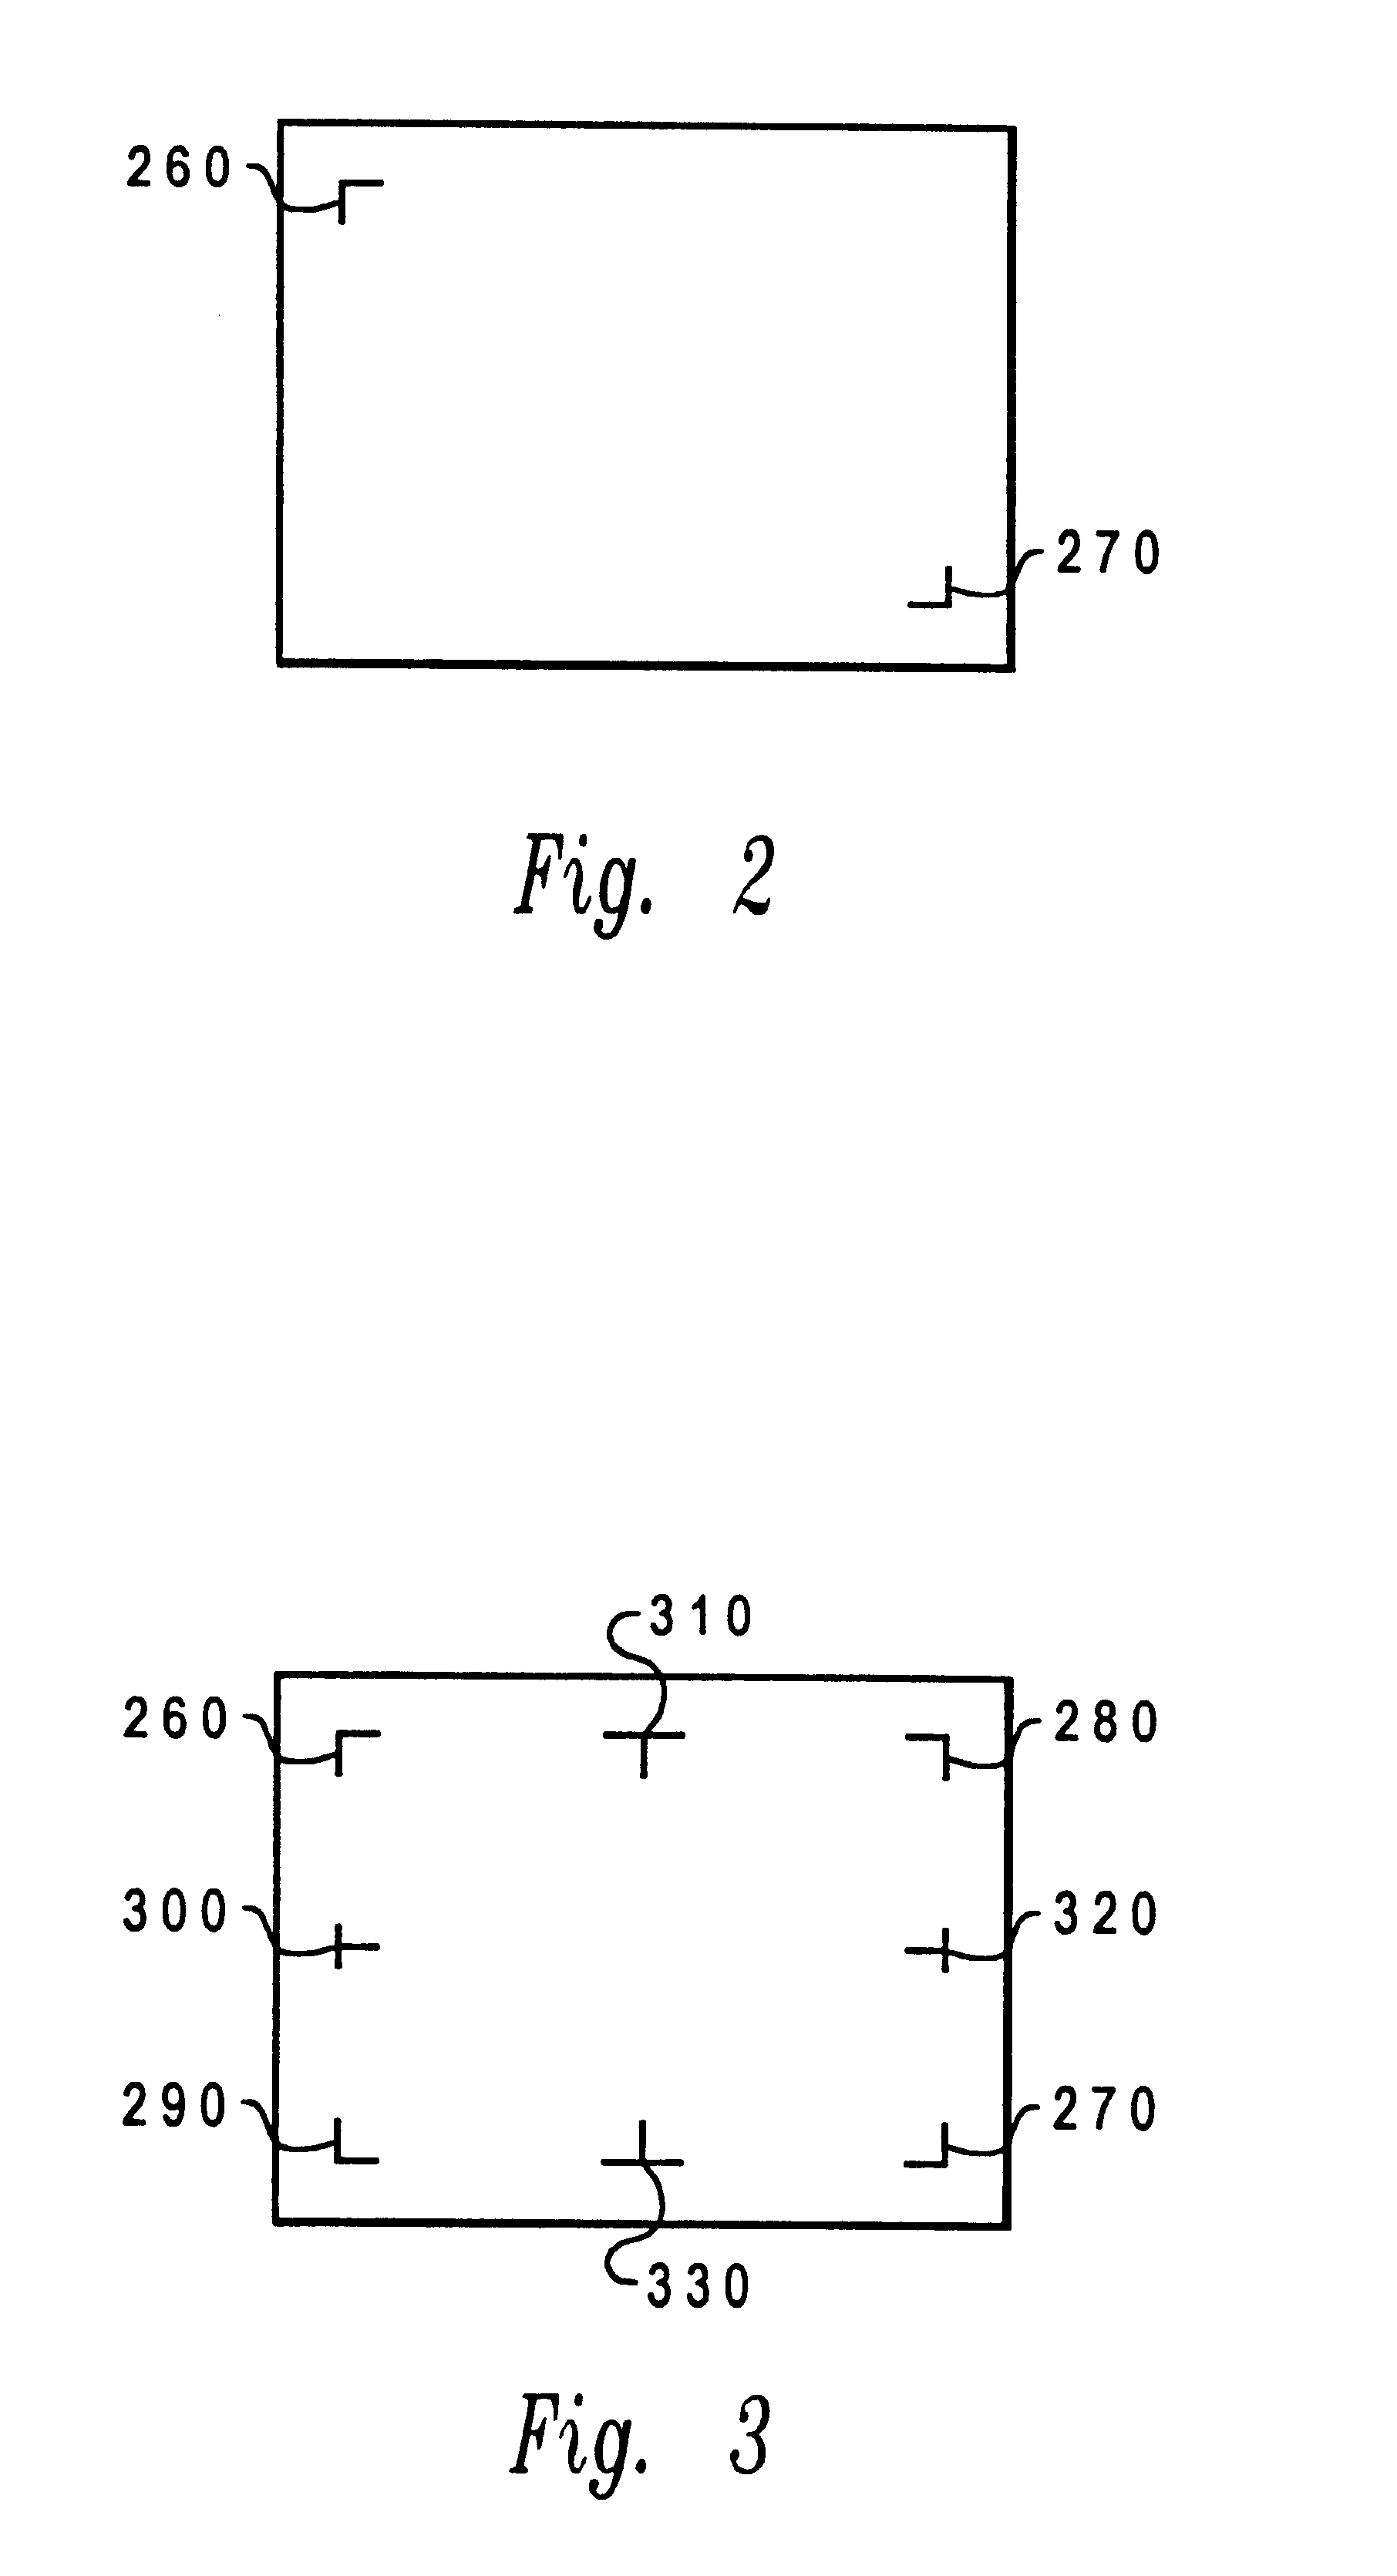 Touch-sensitive display apparatus